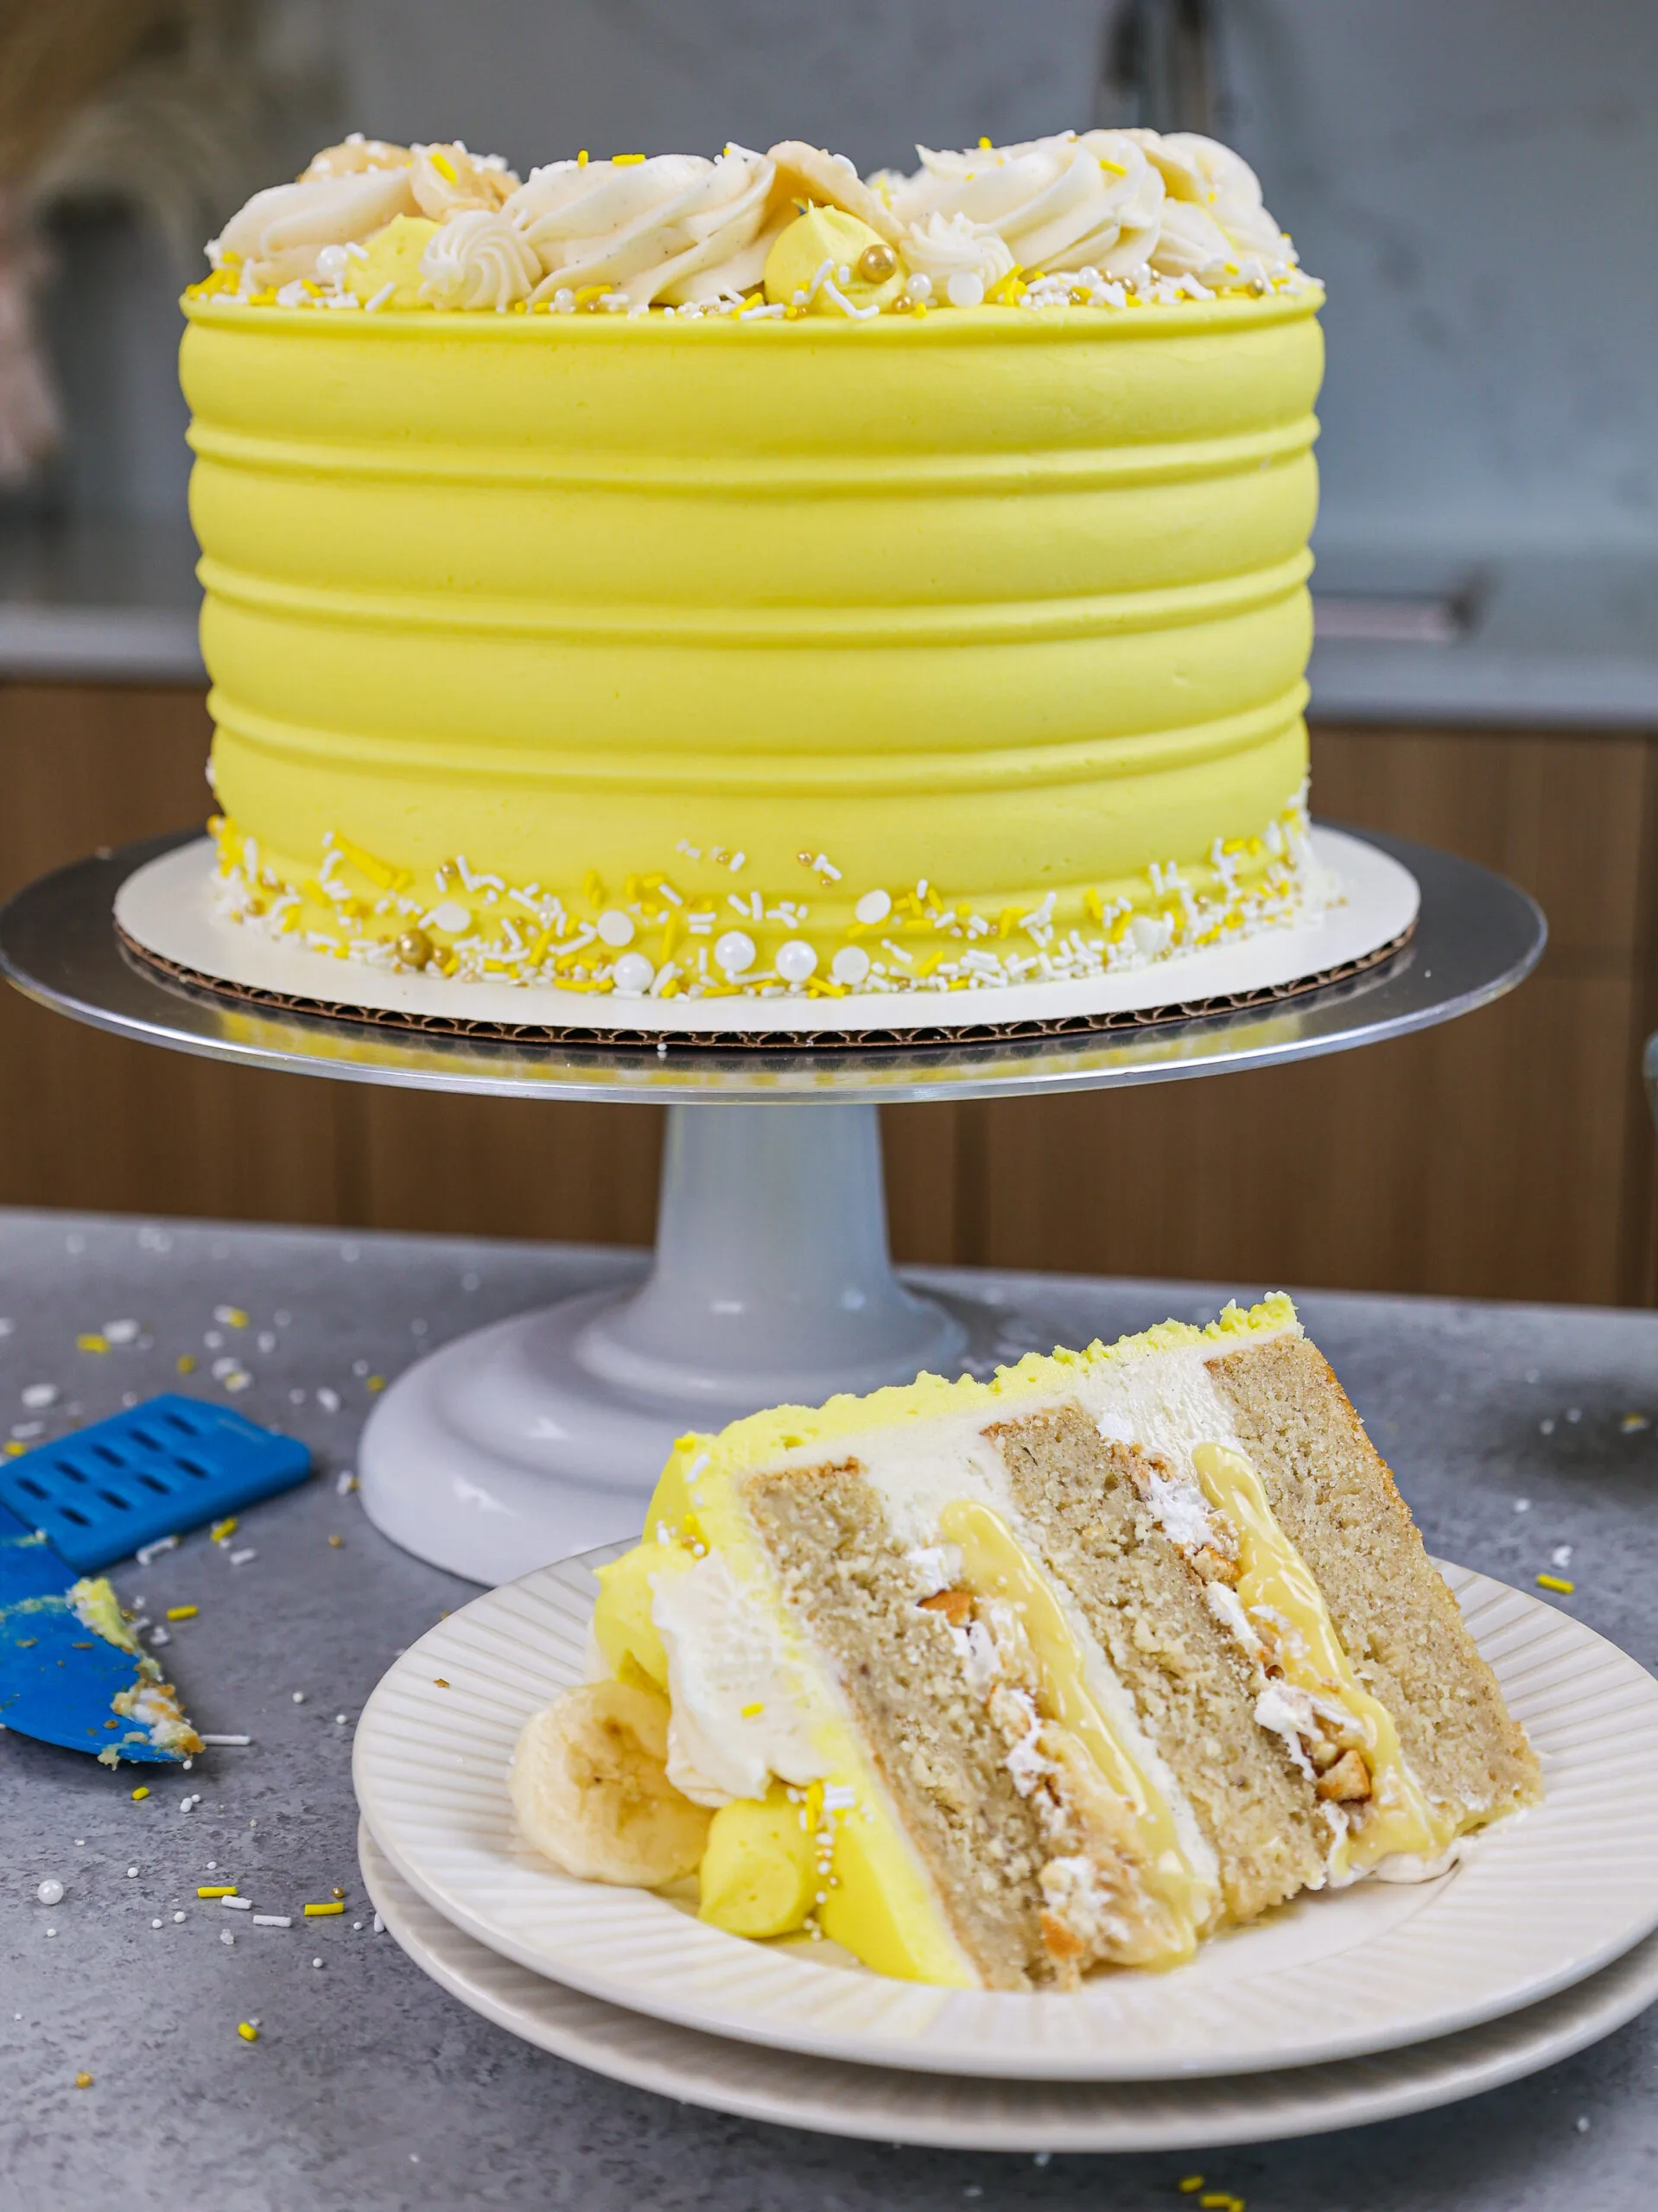 image of a banana pudding layer cake that's been cut into to show it's delicious banana pudding filling 
shared as part of a banana recipe round up